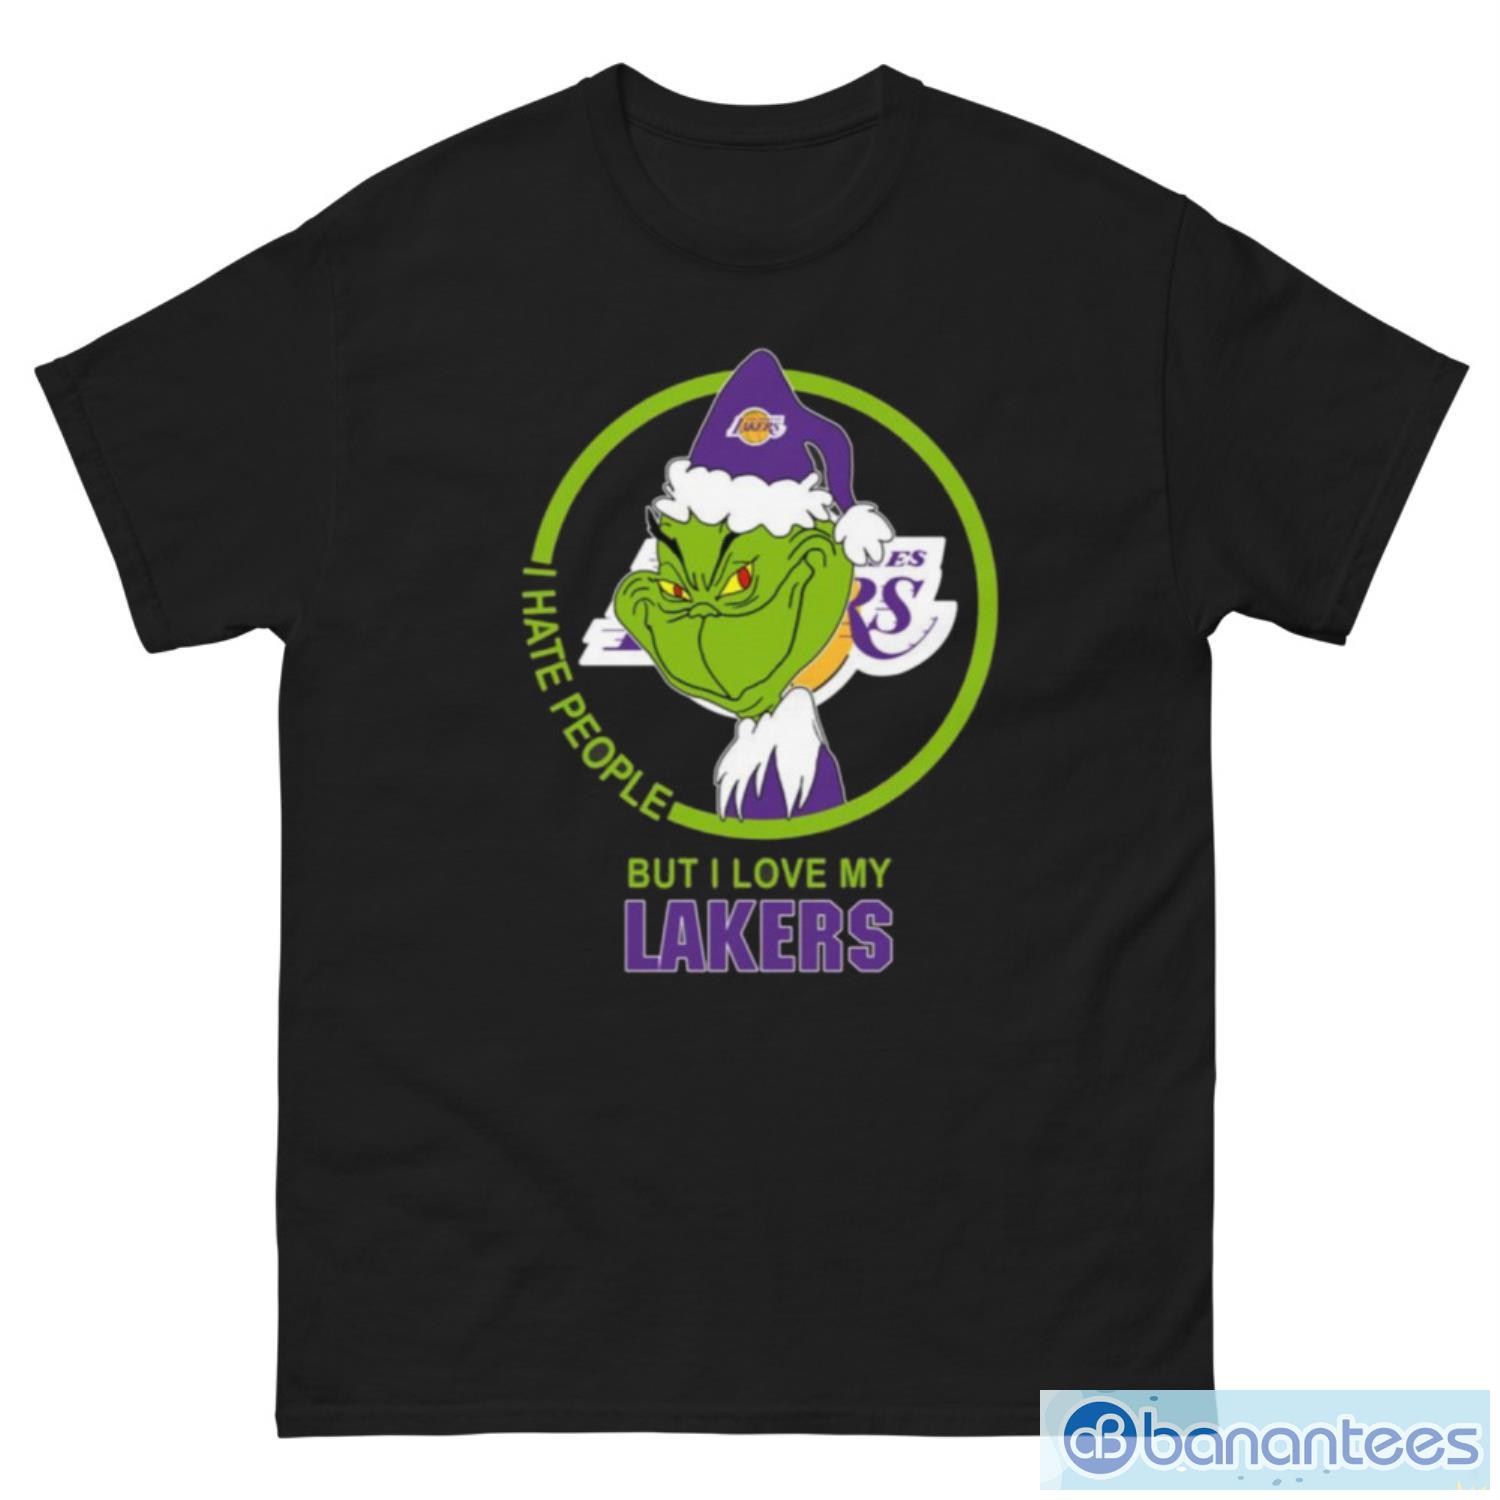 Los Angeles Lakers NBA Christmas Grinch I Hate People But I Love My Favorite Basketball Team T Shirt - G500 Men’s Classic Tee